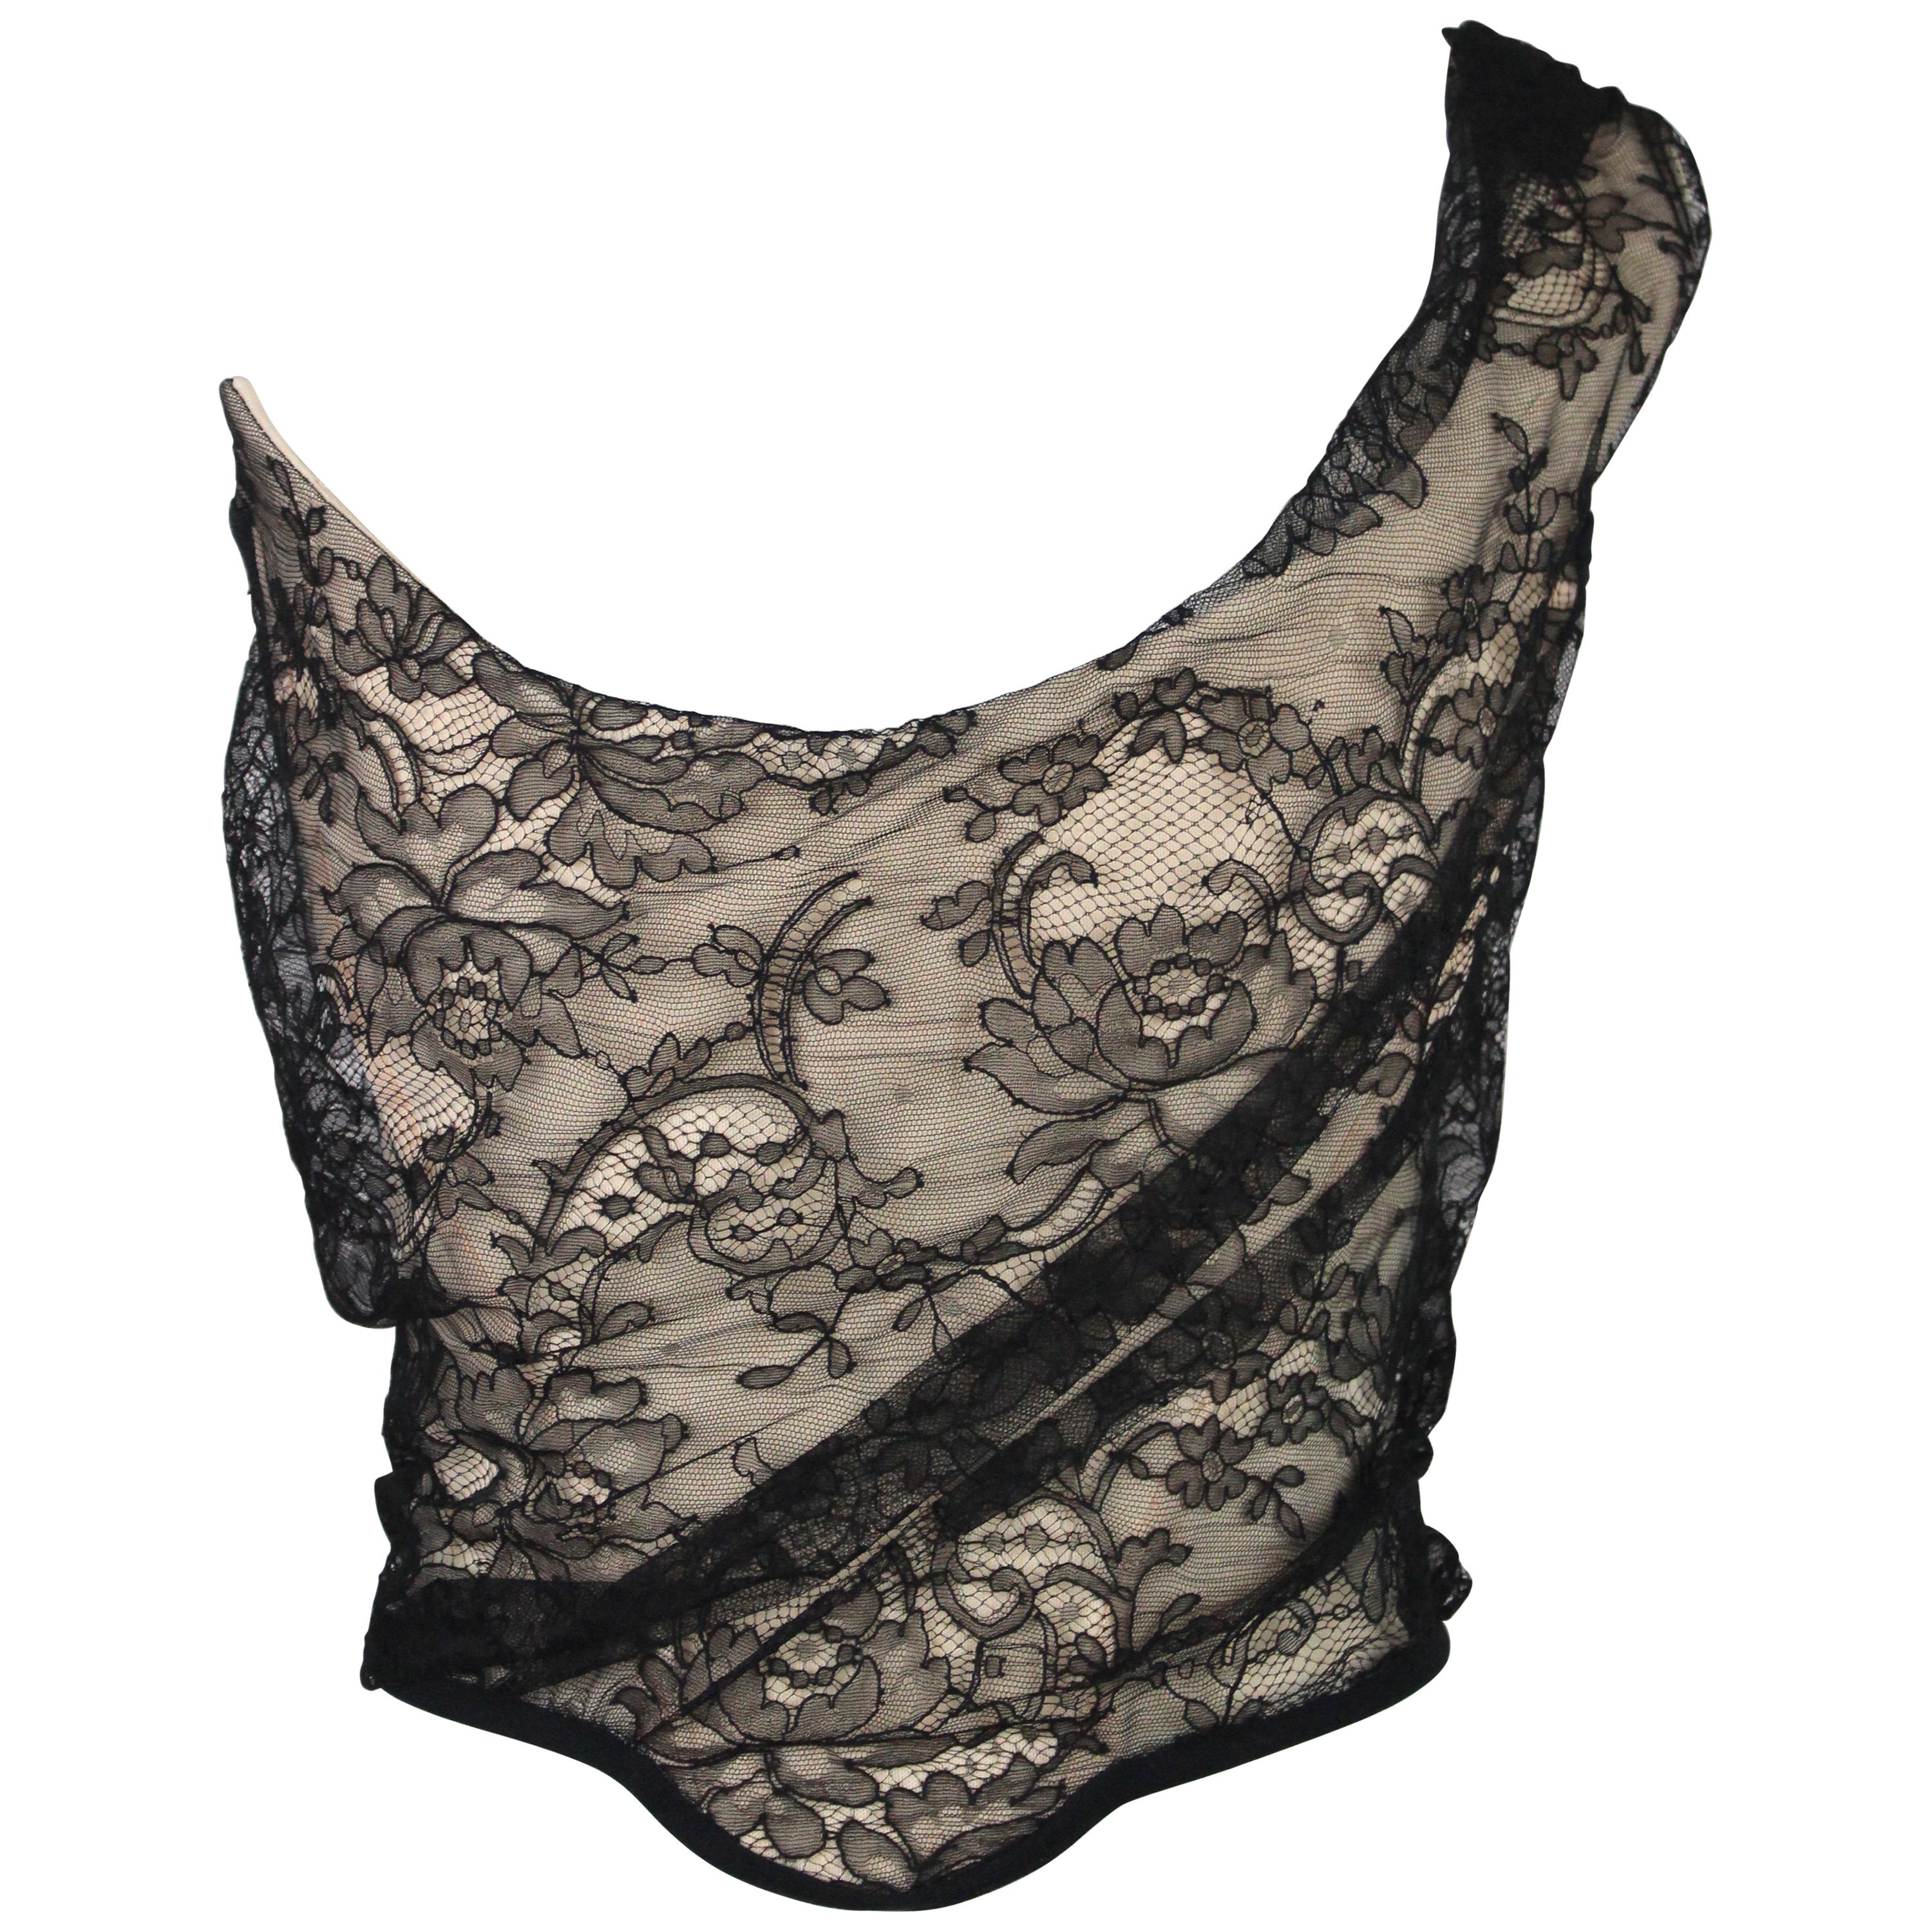 Vivienne Westwood Nude Corset with Black Lace Overlay,  c. 2000's, size US 8 For Sale